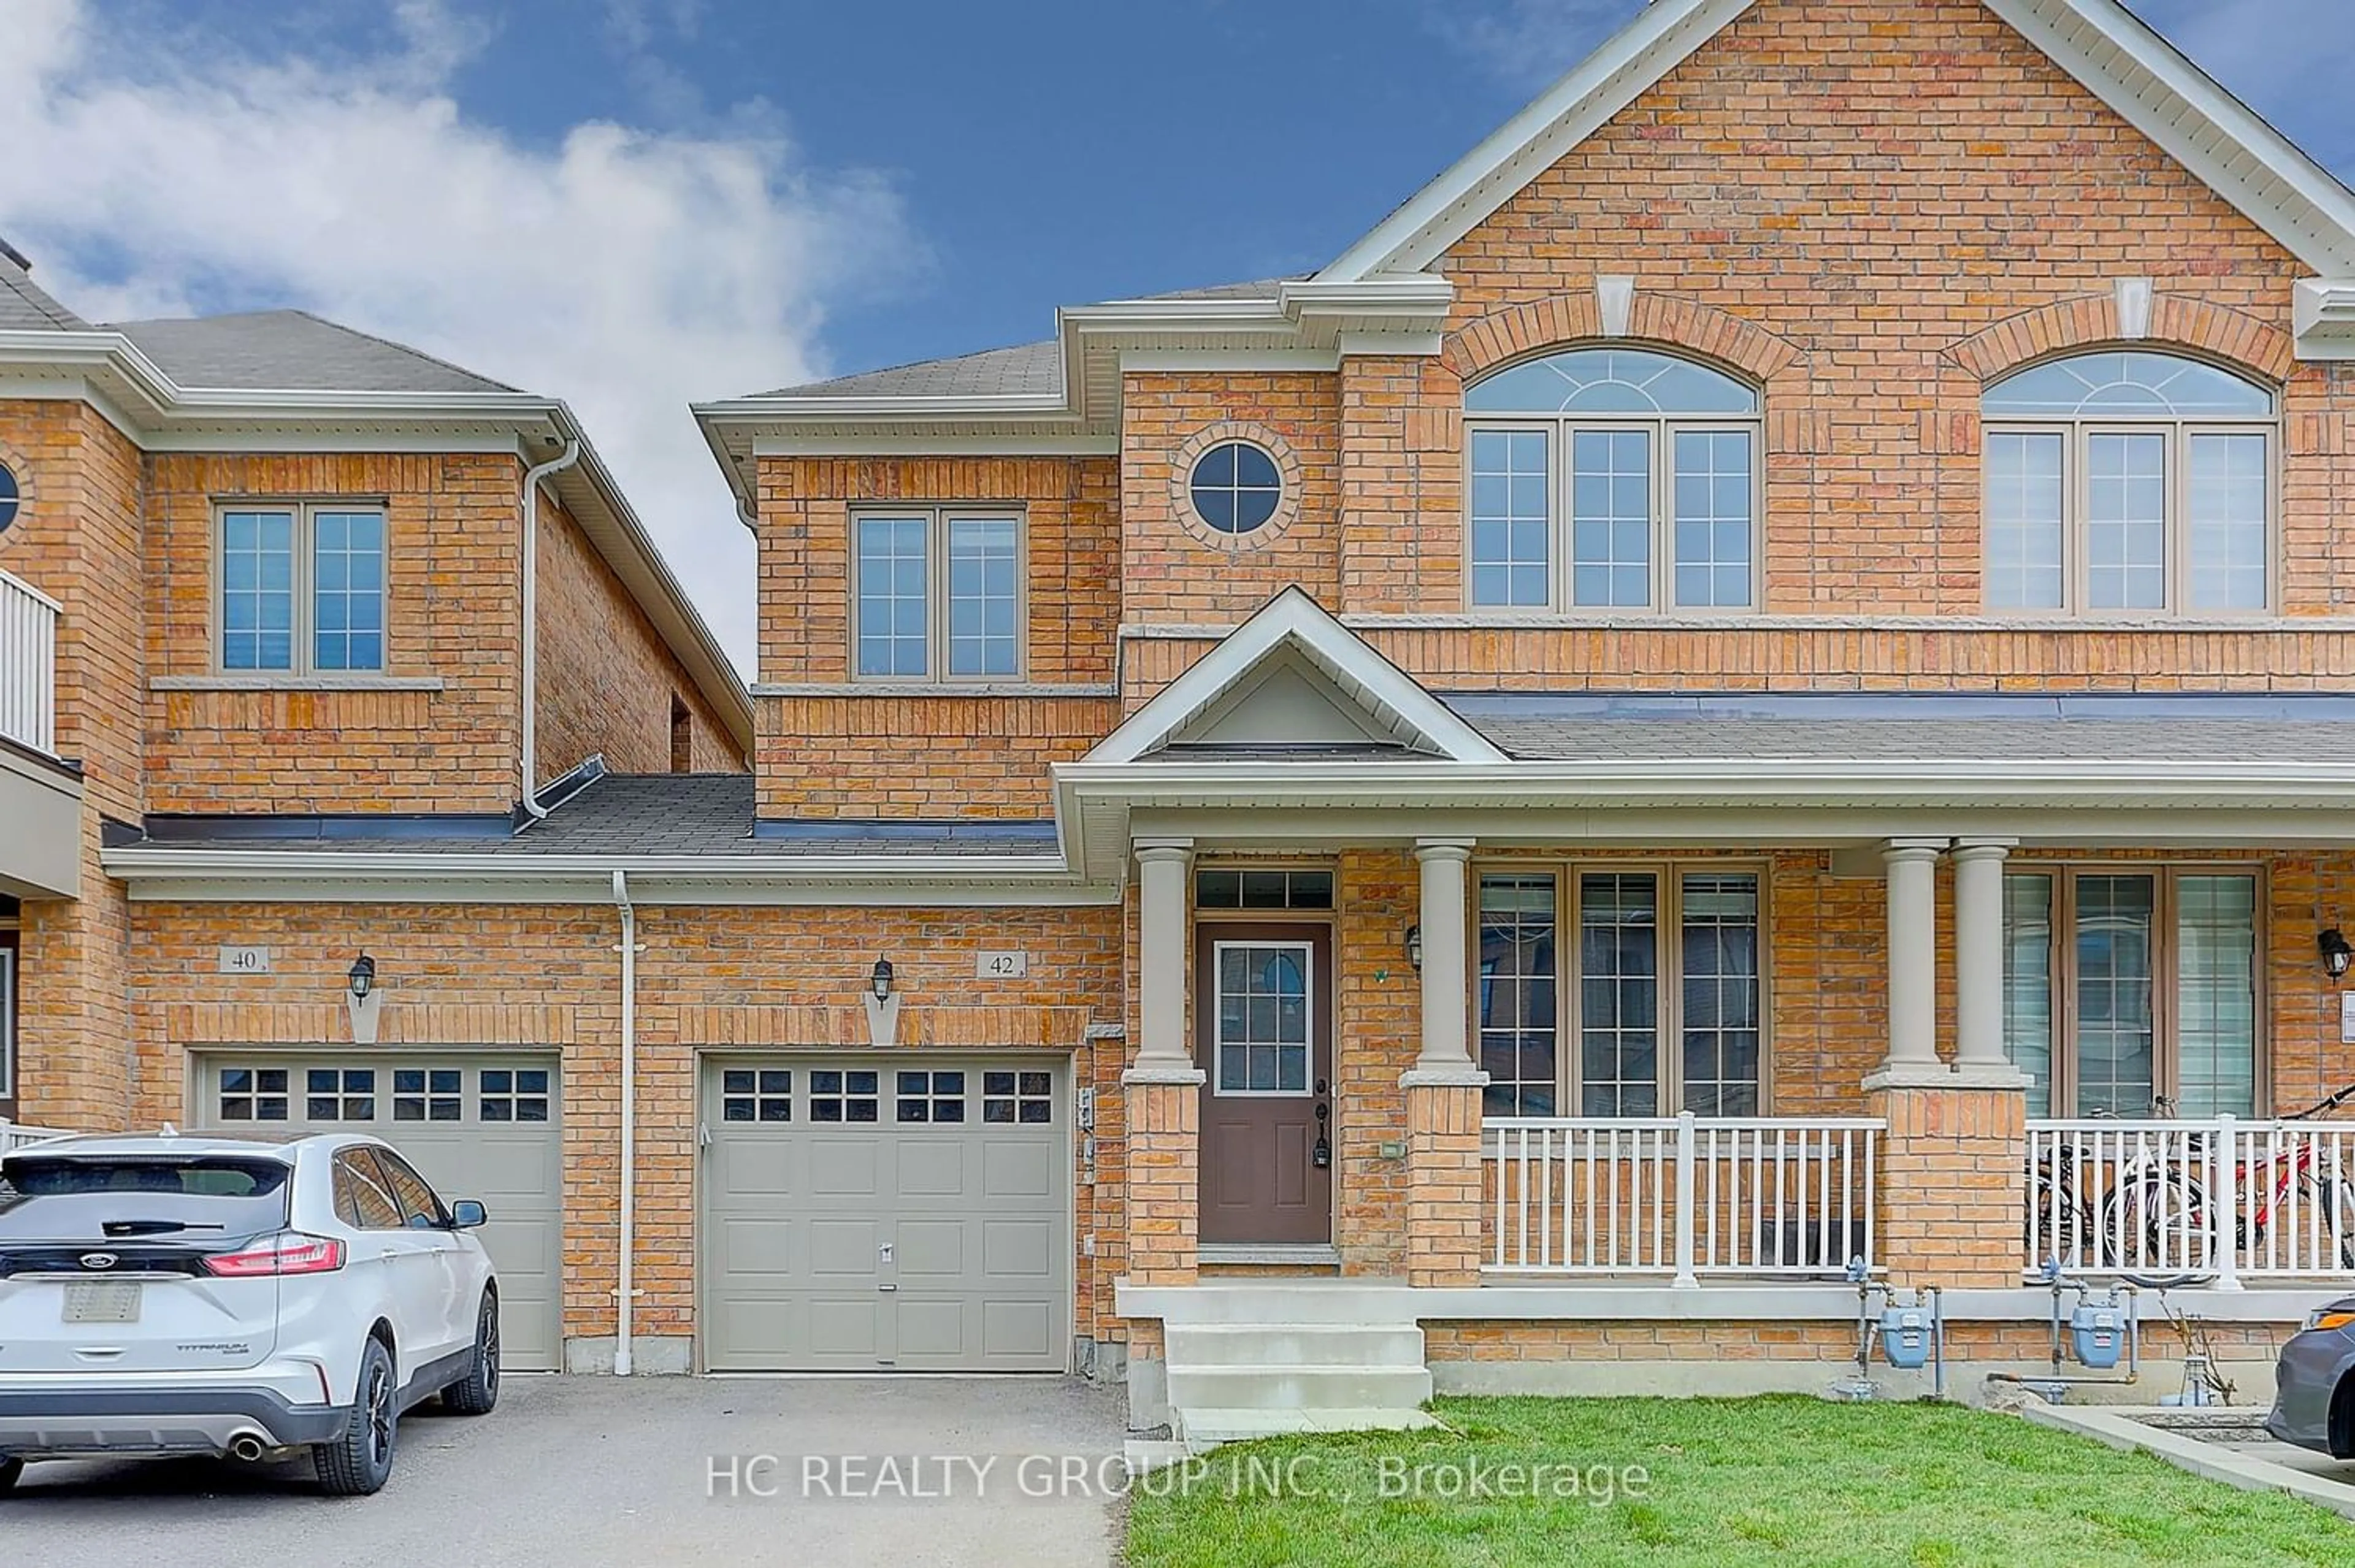 Home with brick exterior material for 42 Jake Smith Way, Whitchurch-Stouffville Ontario L4A 4P8